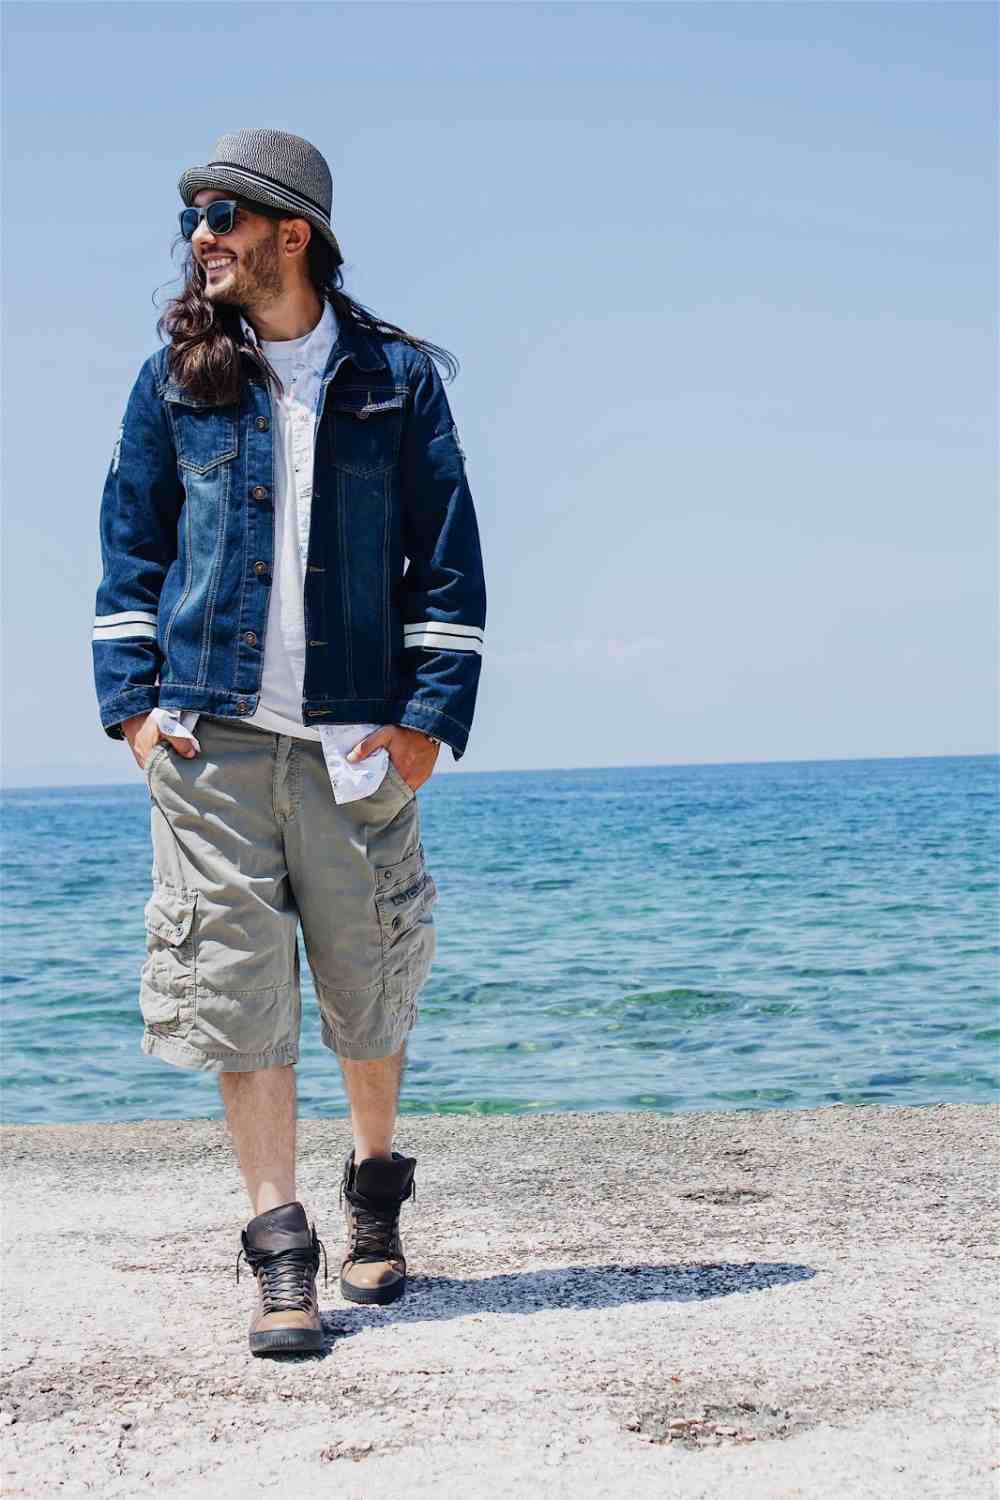 cargohose short with high shoes and blue jeans jacket combine men's look